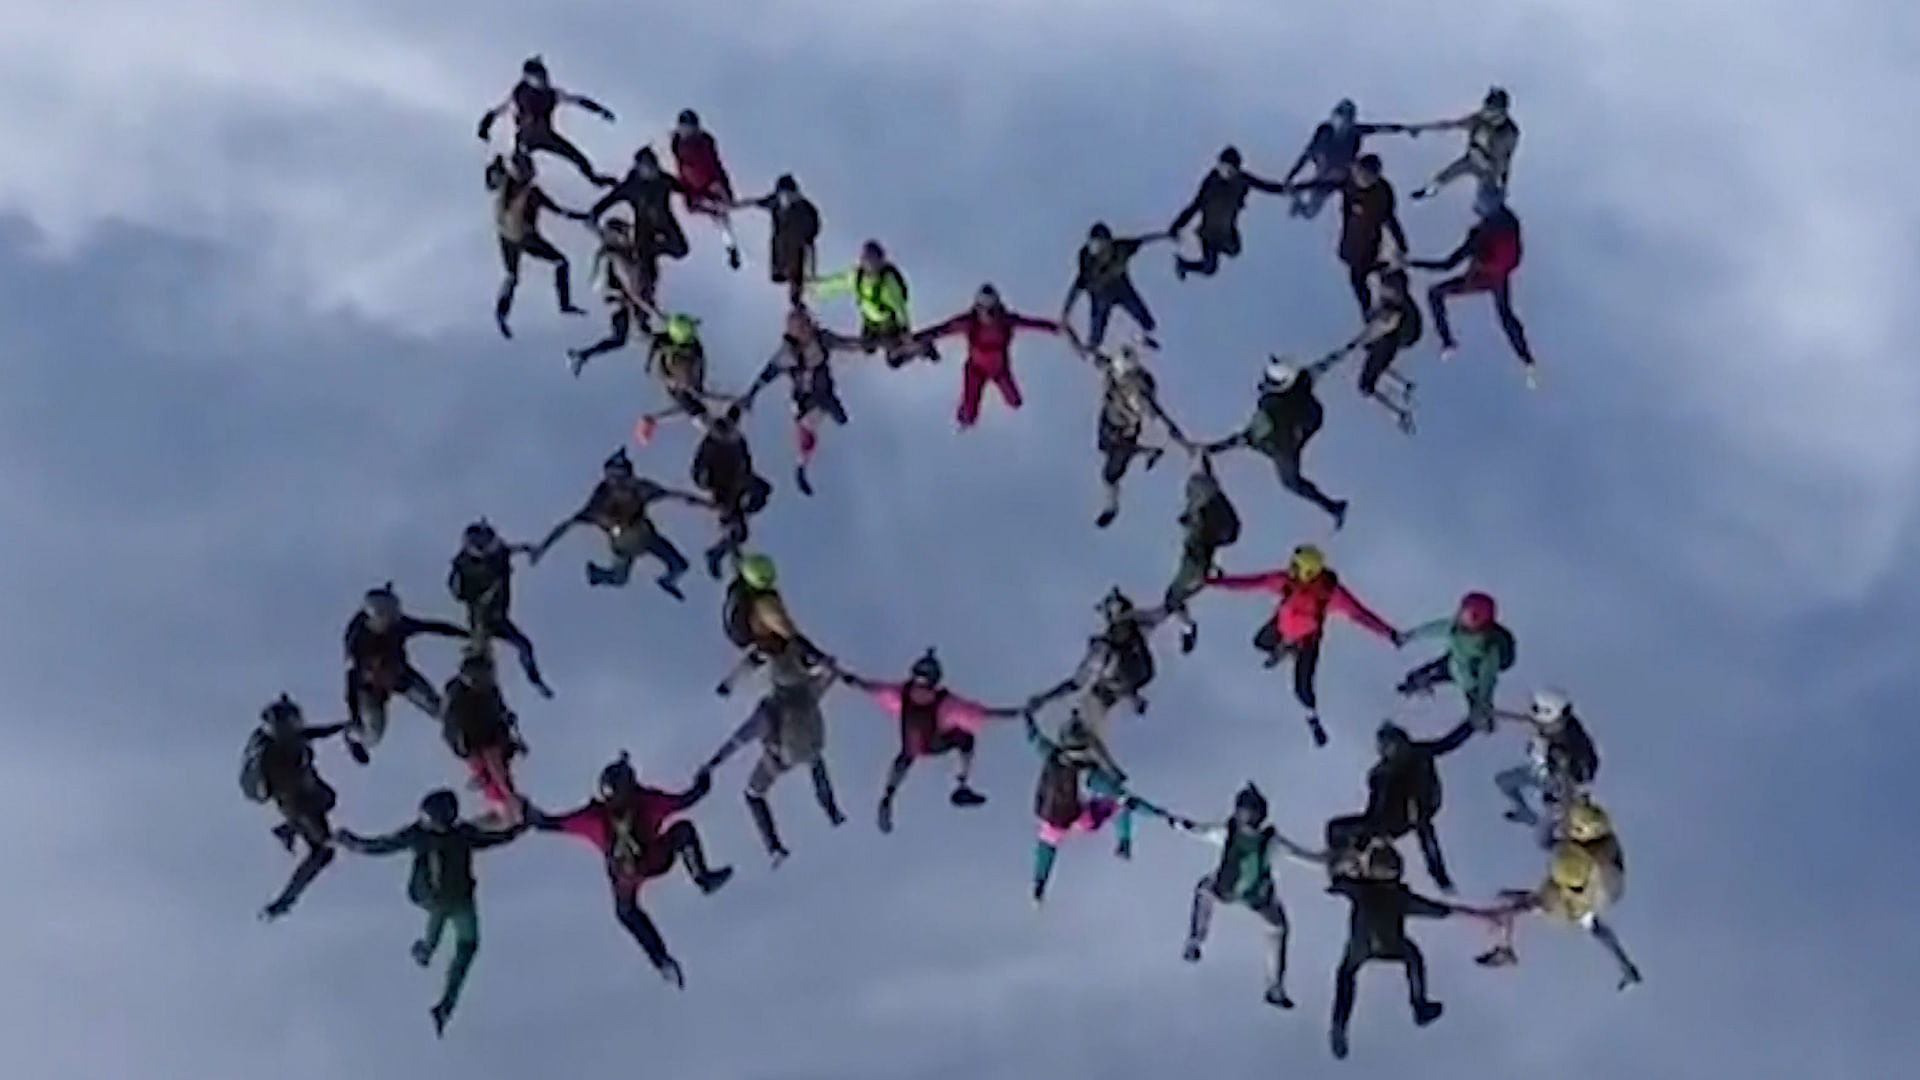 The skydivers form a human chain in the sky.